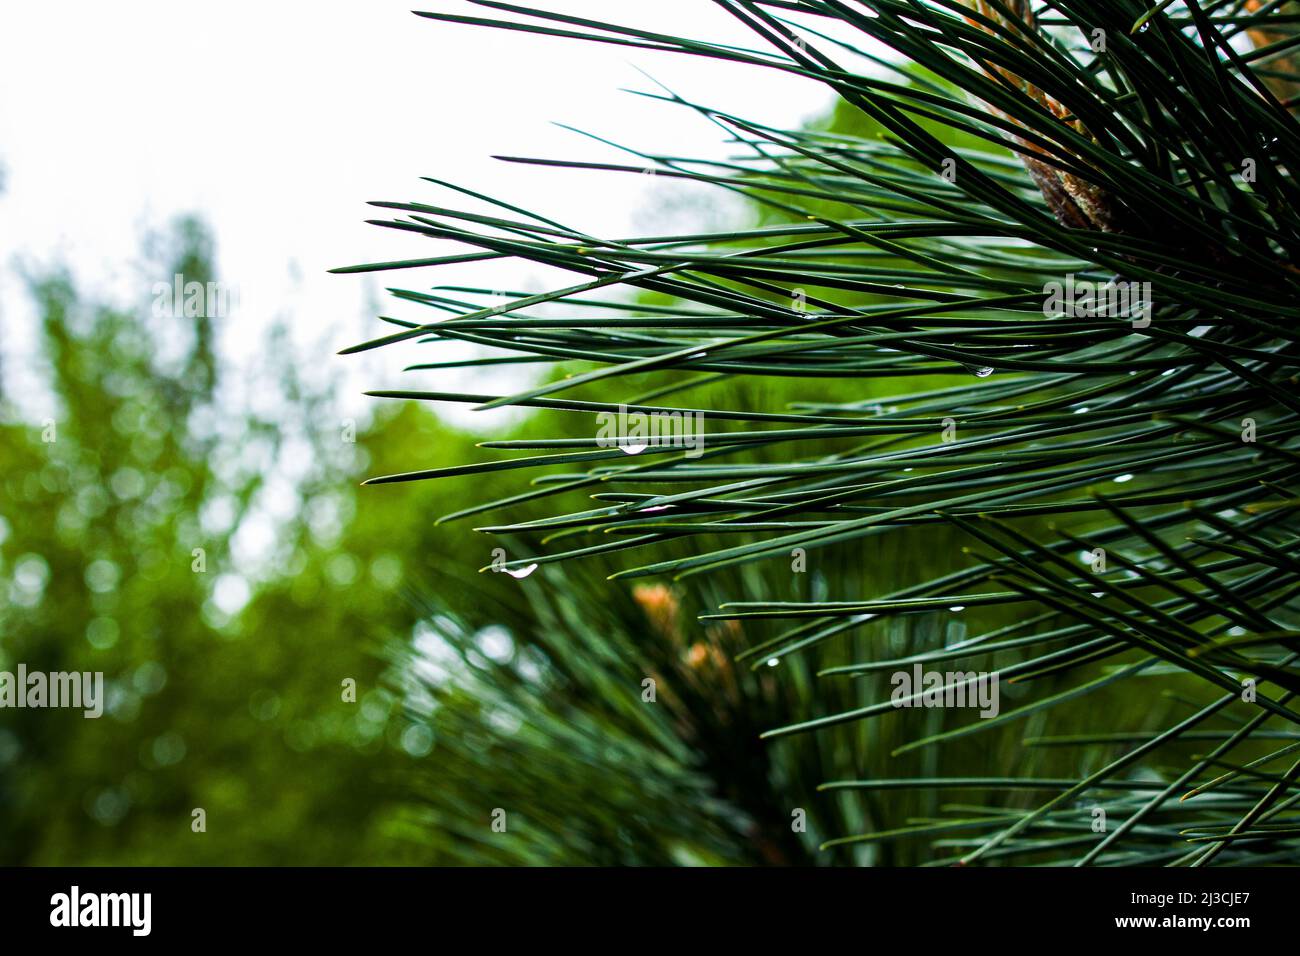 Several Green Fir Branches Stock Photo - Download Image Now